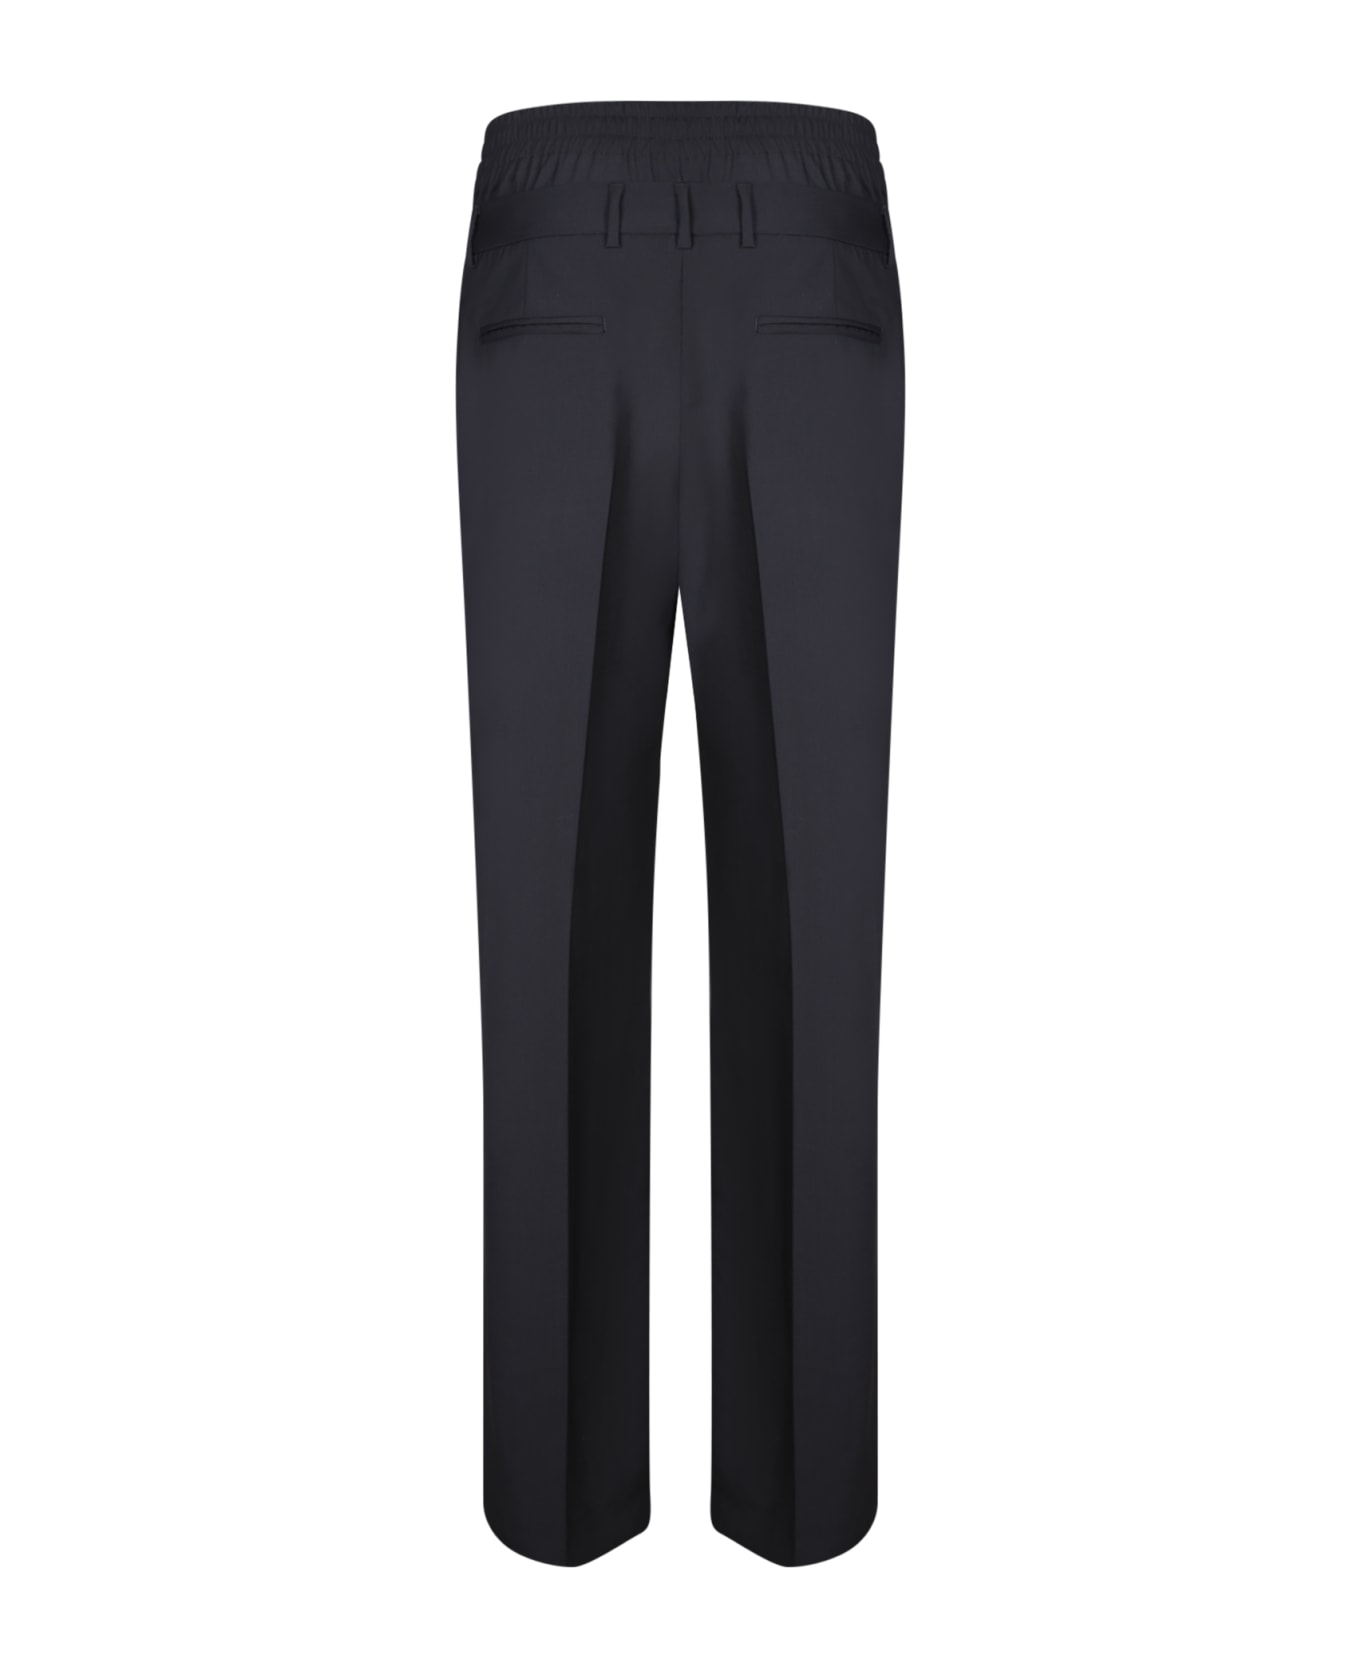 MSGM Wide Fit Grey Trousers - Grey